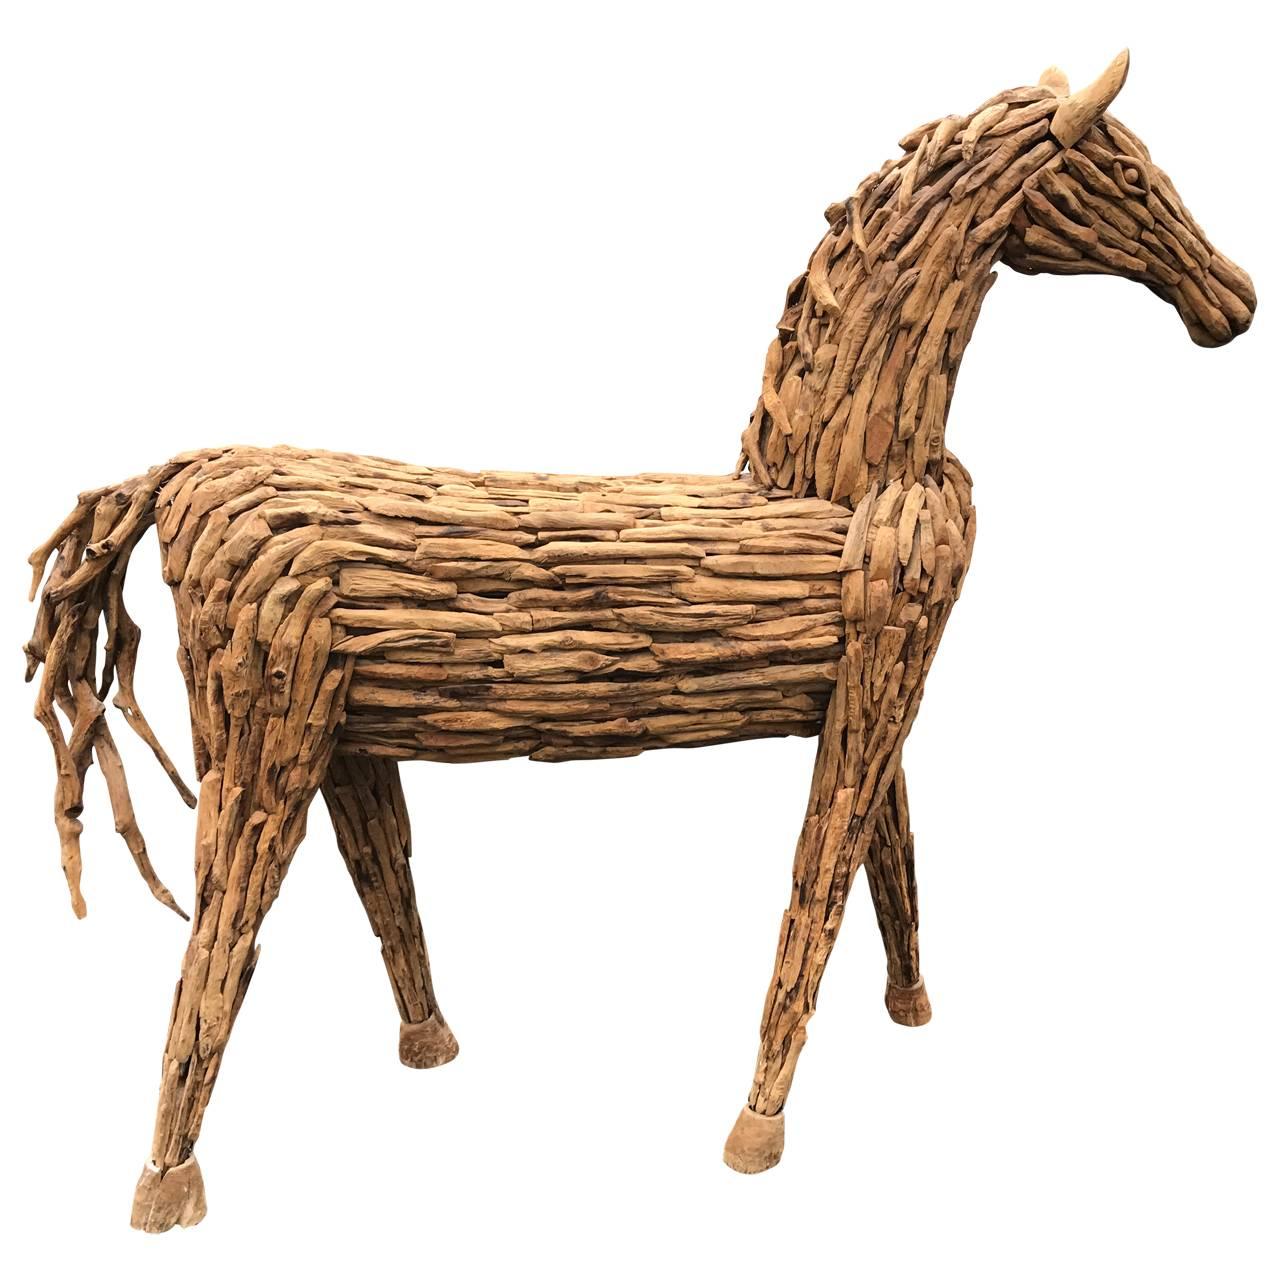 Three dimensional lifesize sculpture of horse in resting stance. Each layer nailed by hand, showing mastery of technique. A unique one of a kind art medium.